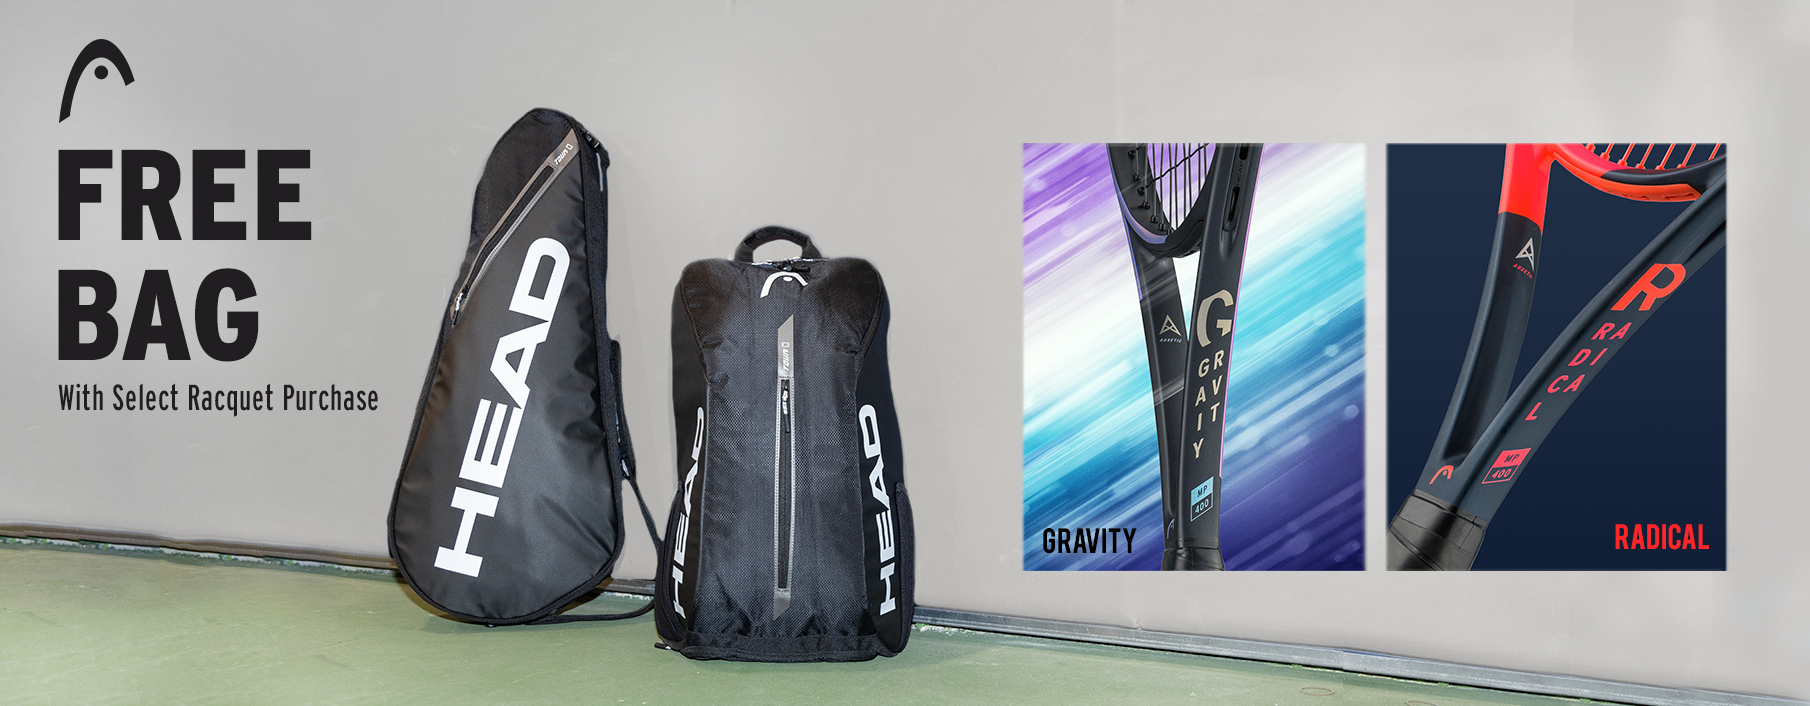 head tennis bag backpack racquet racket 3 pack 3-pack gravity radical extreme 